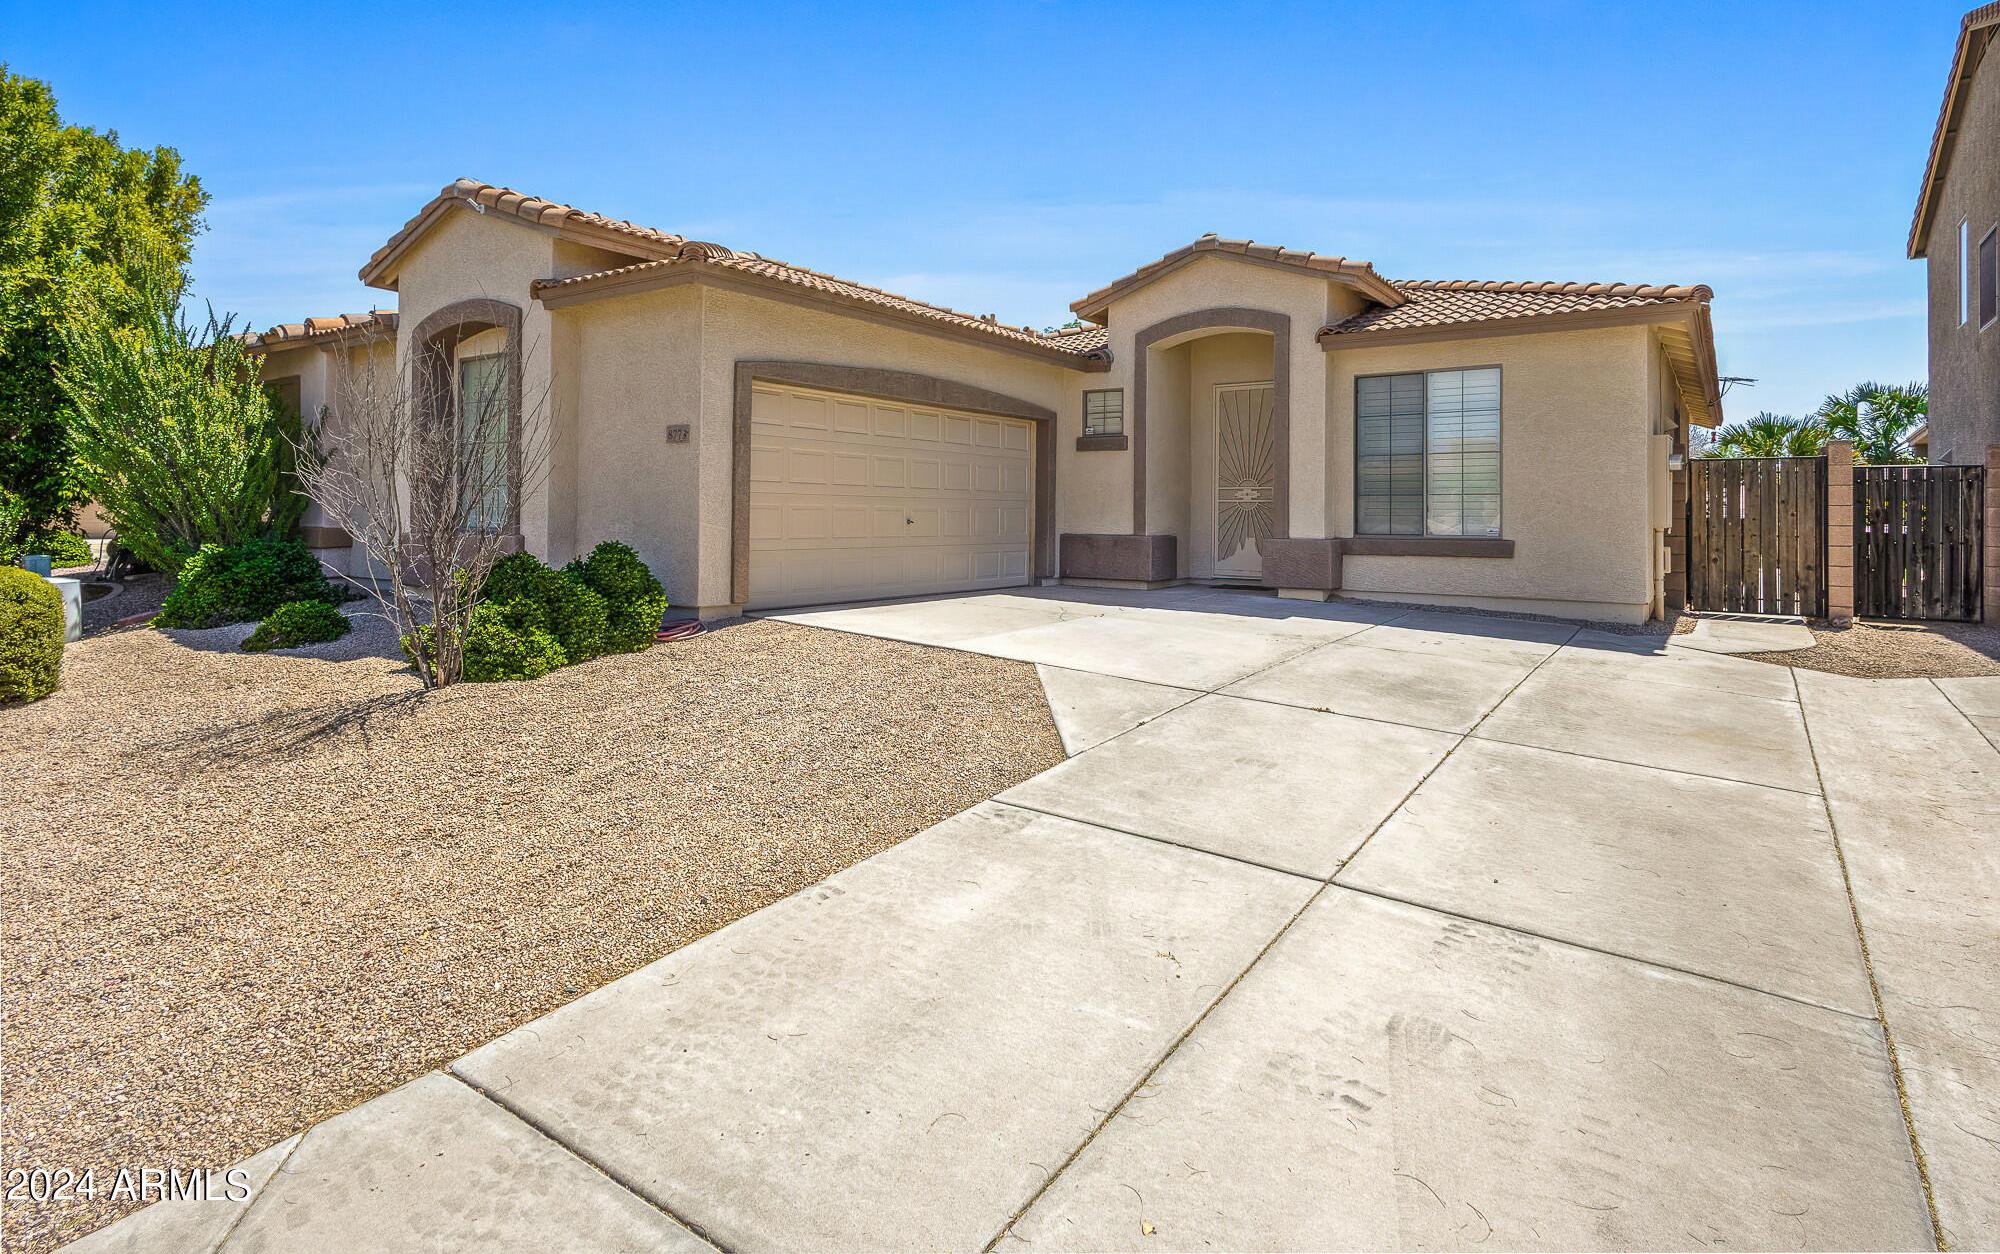 Photo one of 8773 W Windrose Dr Peoria AZ 85381 | MLS 6691985